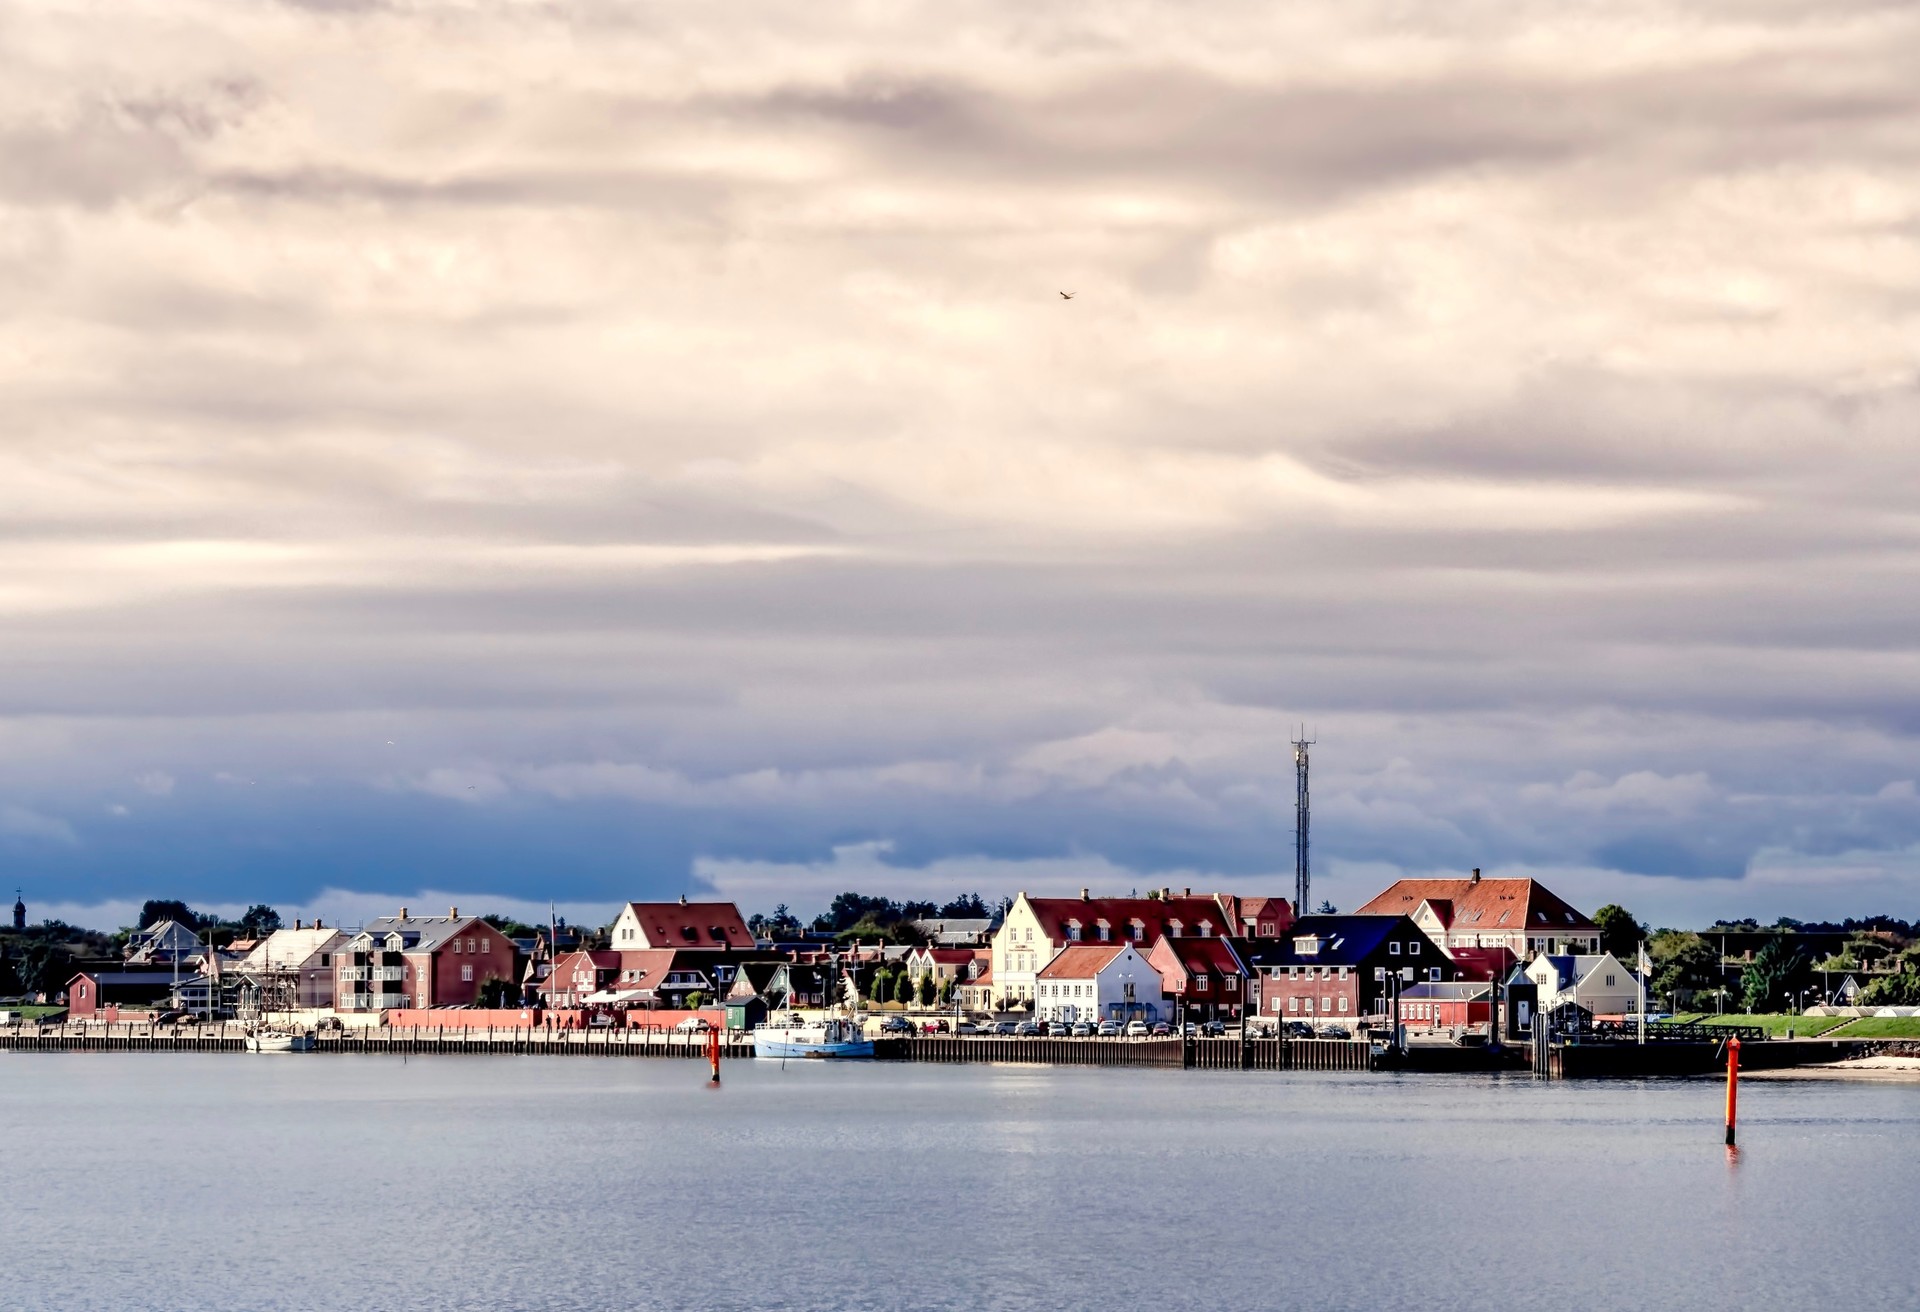 Nordby on the danish island fano seen from the ferry